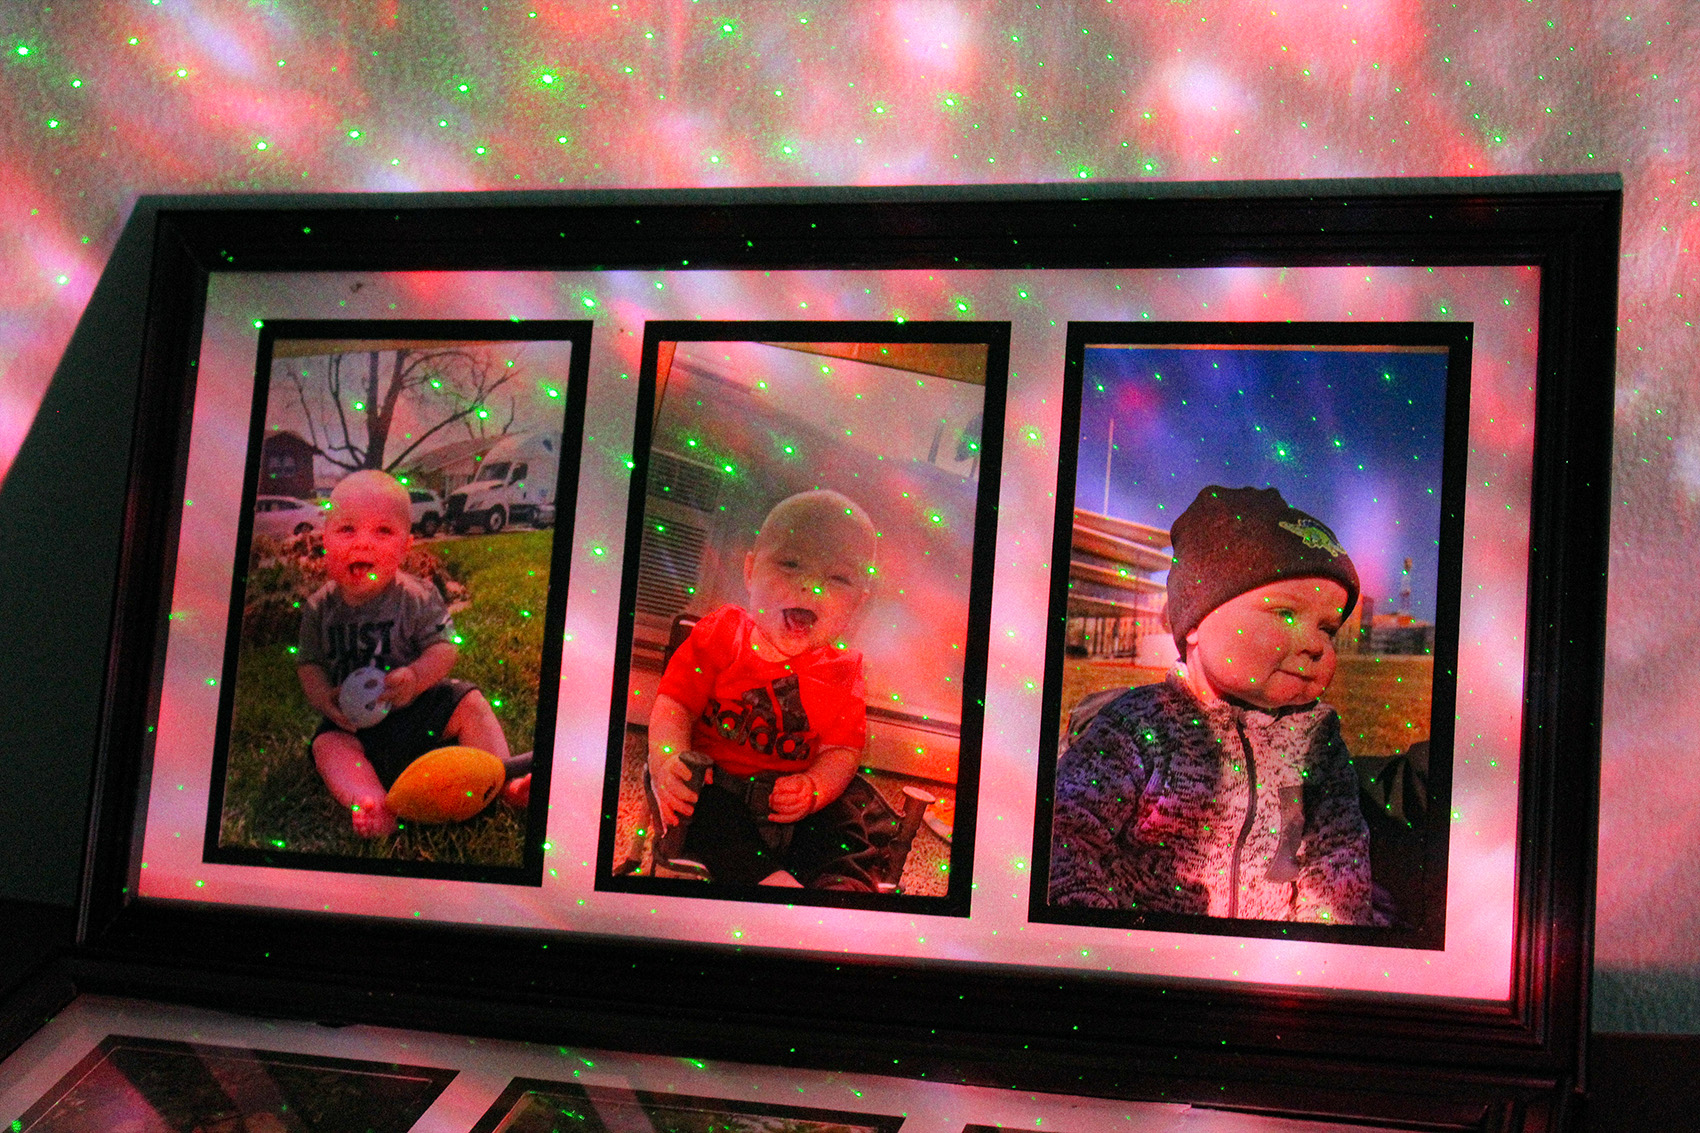 Three pictures of a baby in a 3-photo frame leaning against a wall with pink and purple light with green dots shining over it.